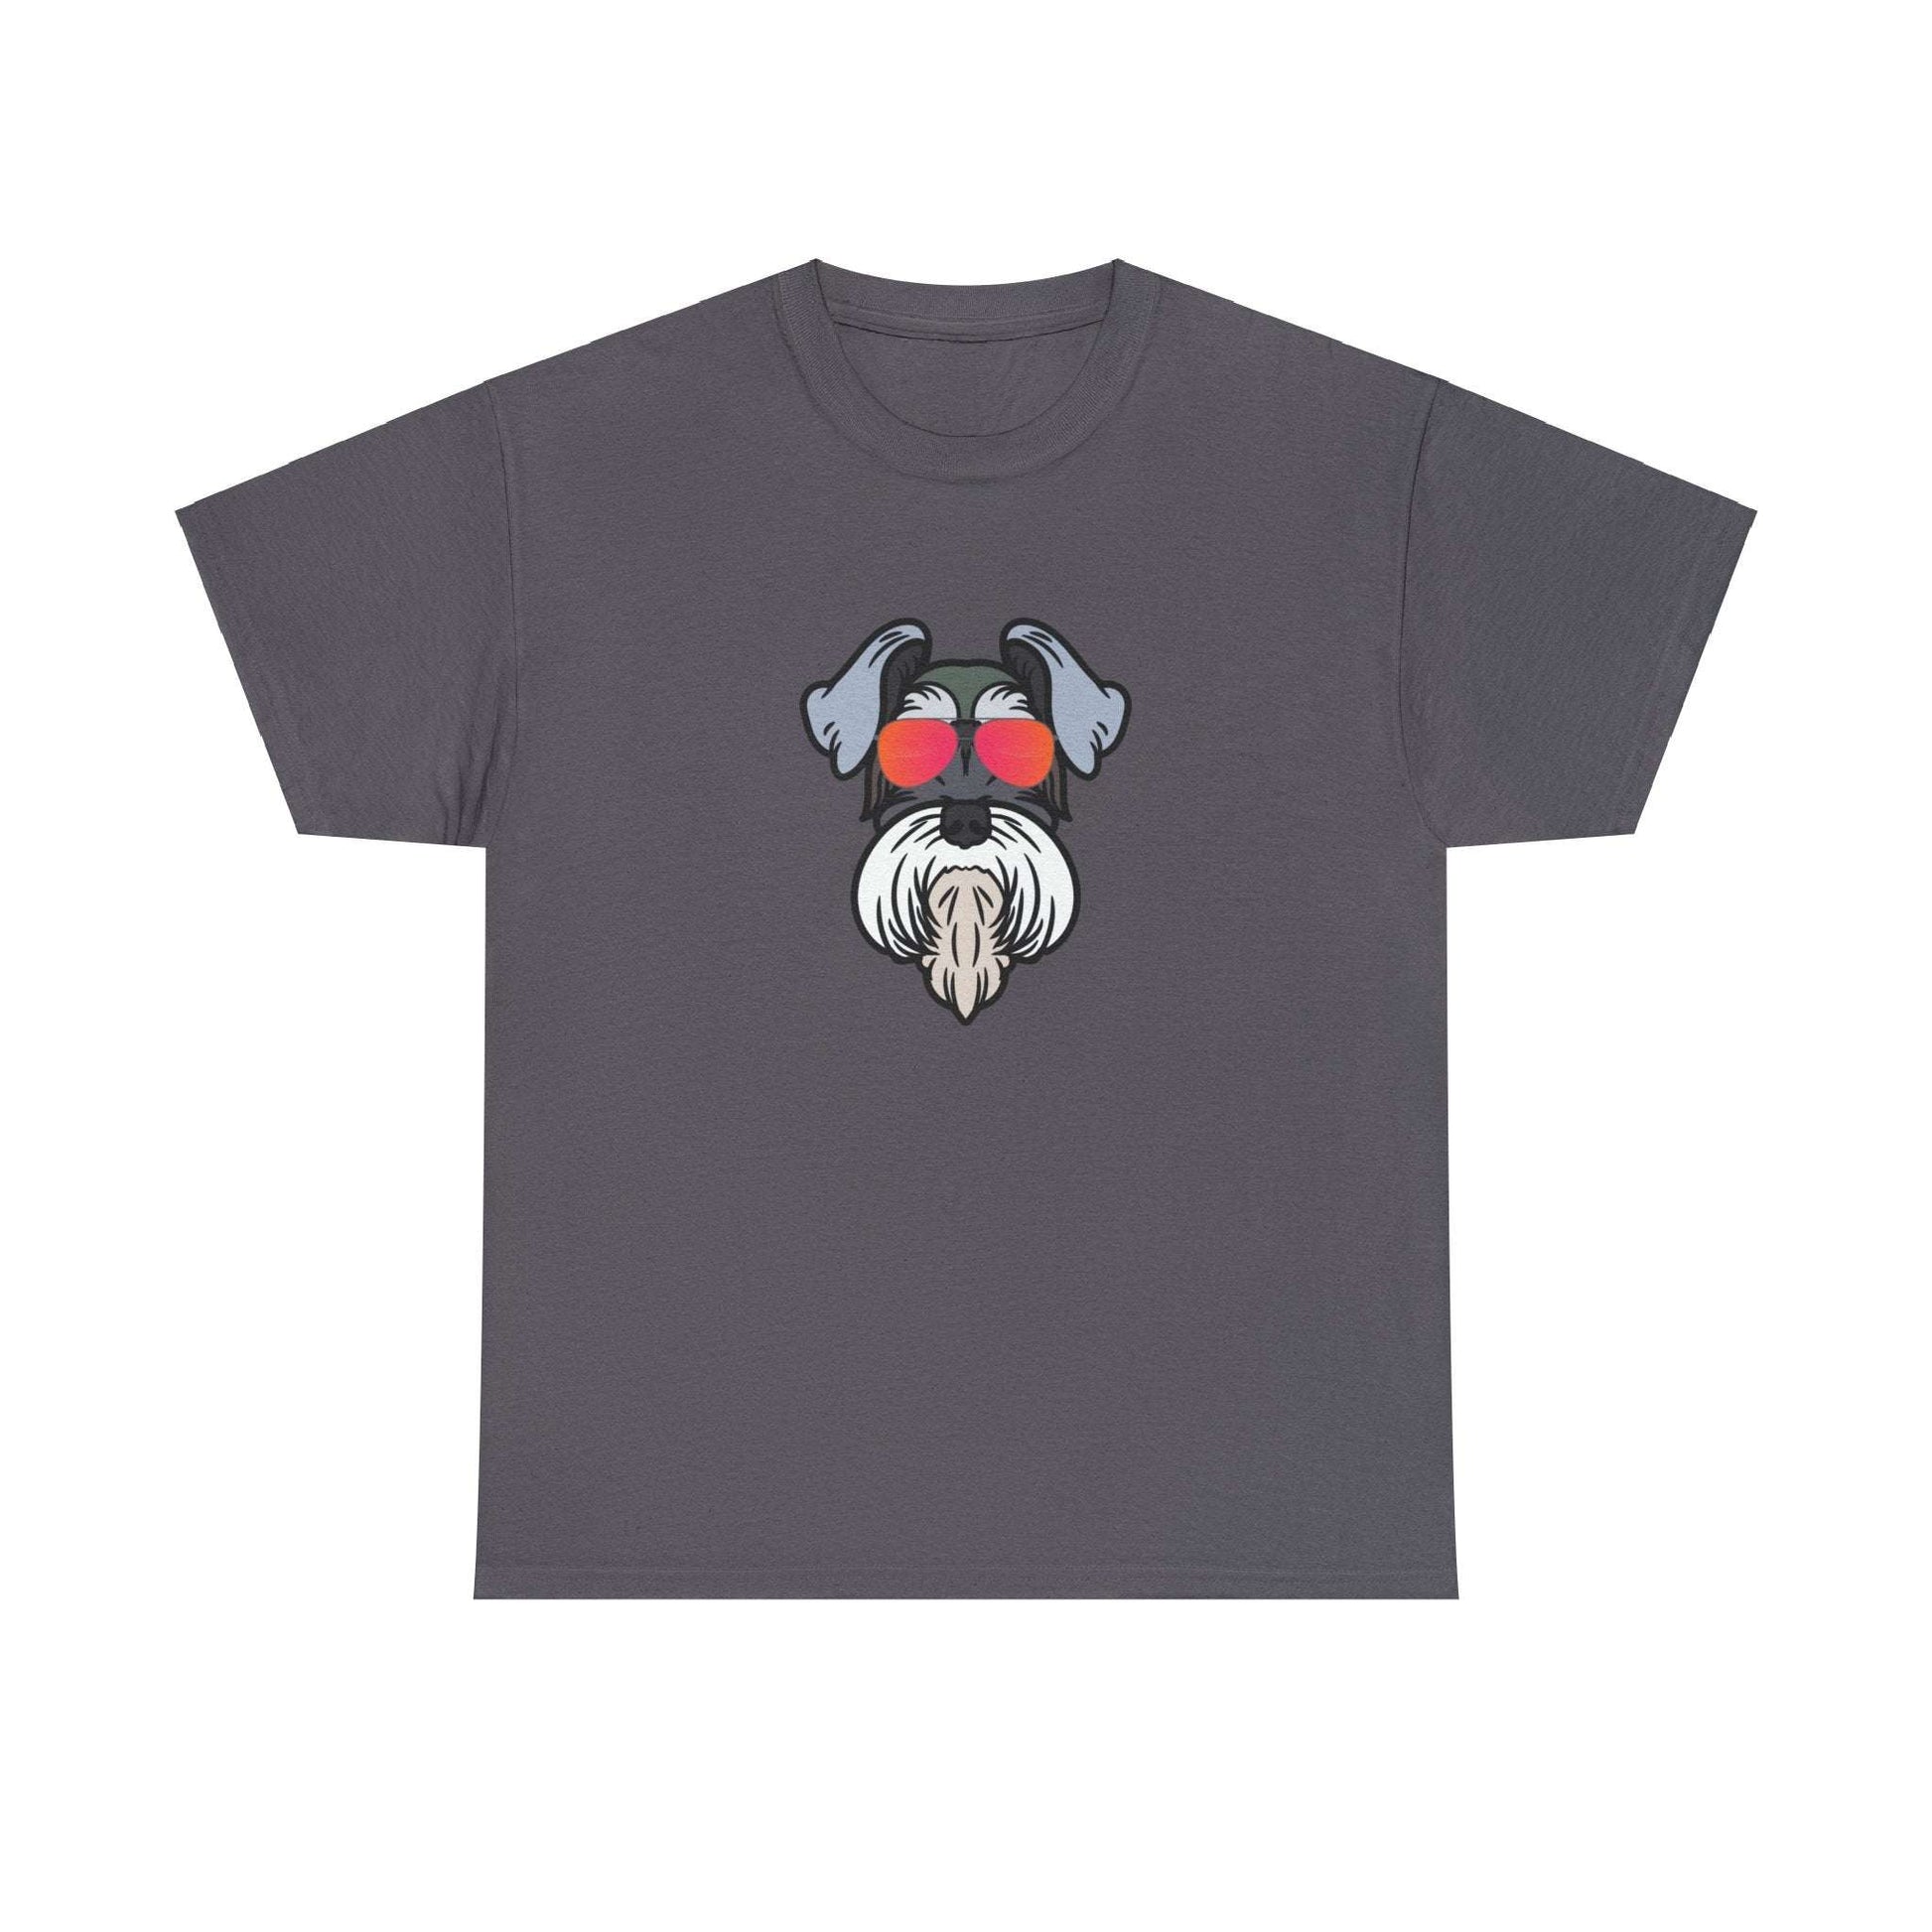 Fabulous Tee Shirts' 'Cool Schnauzer' grey t-shirt displayed to emphasize its superior quality.